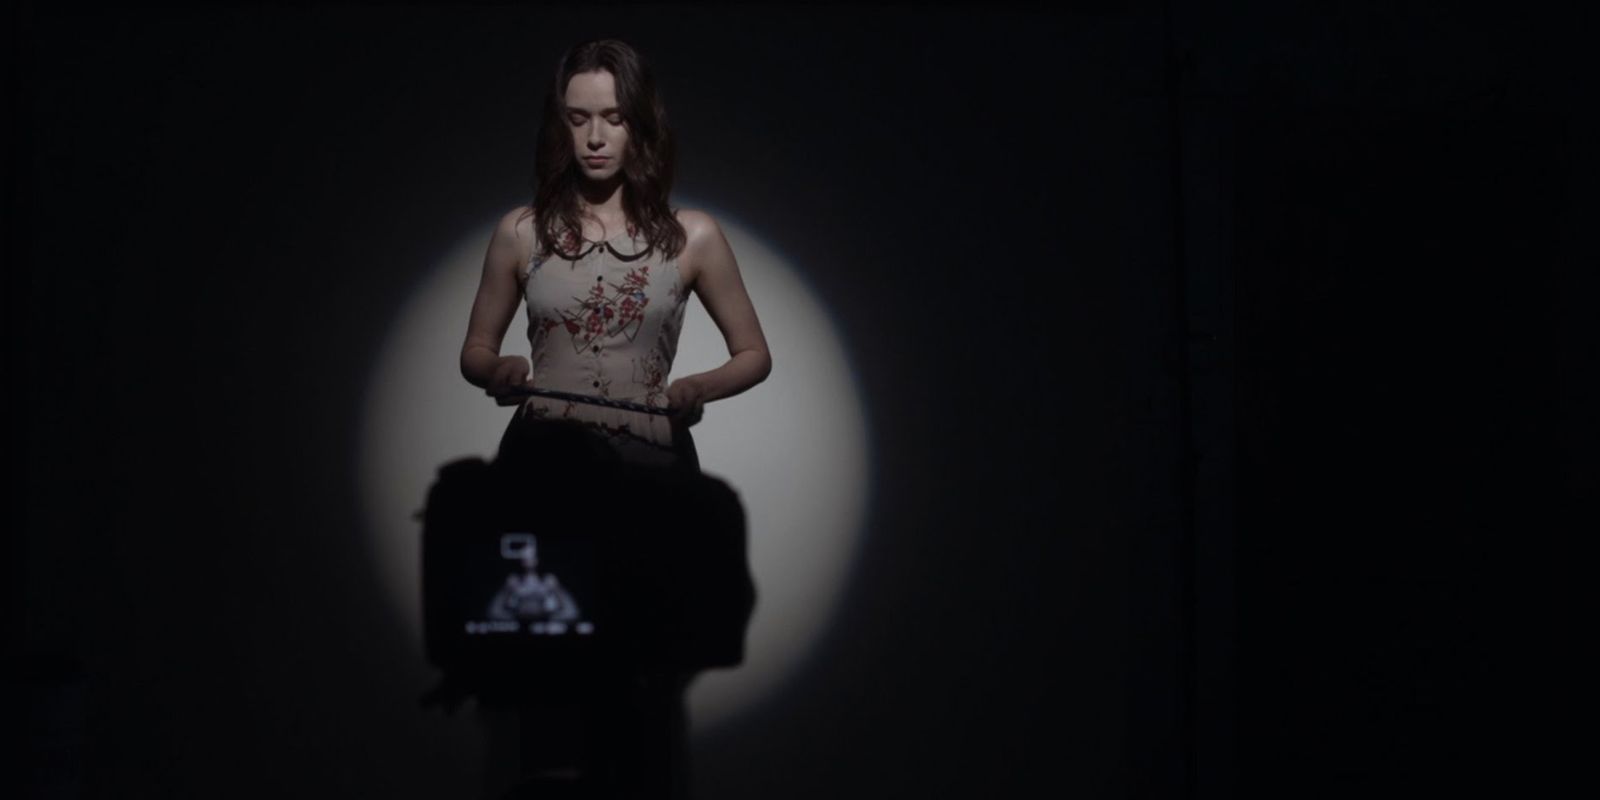 A woman stands in front of a camera in a dimly lit audition room